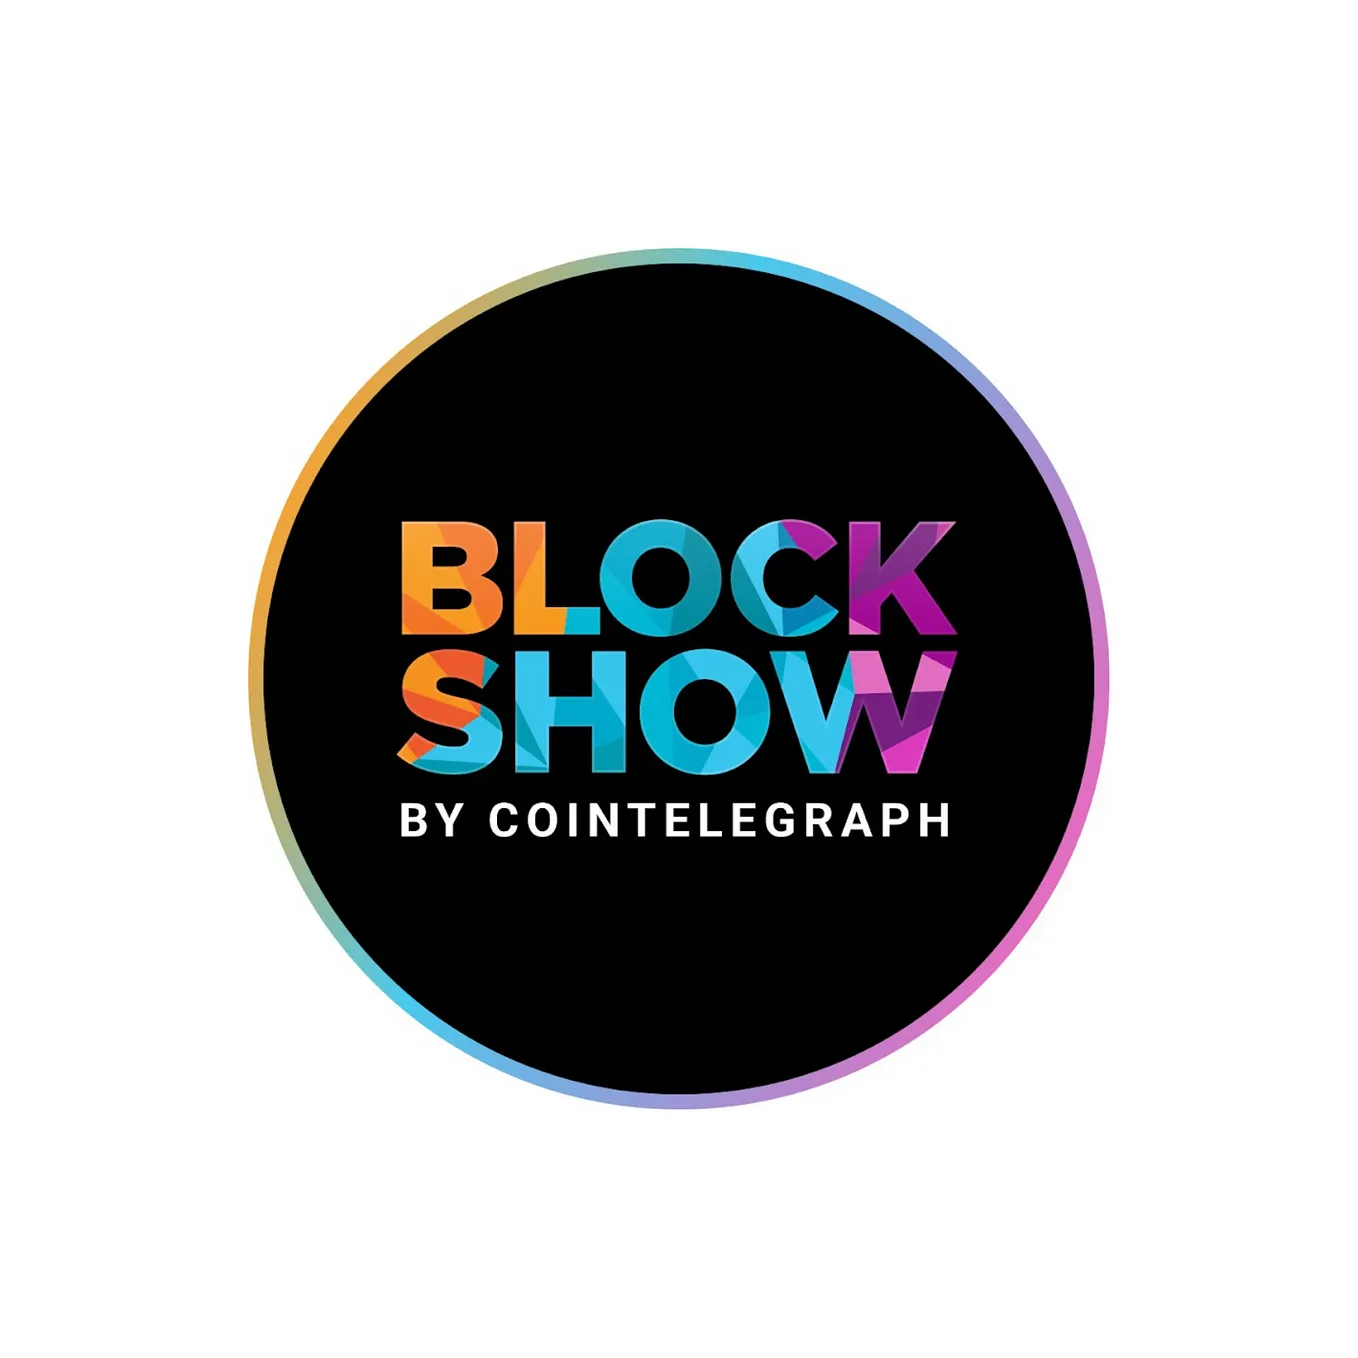 BlockShow Merges with Crypto Festival BlockDown in Hong Kong